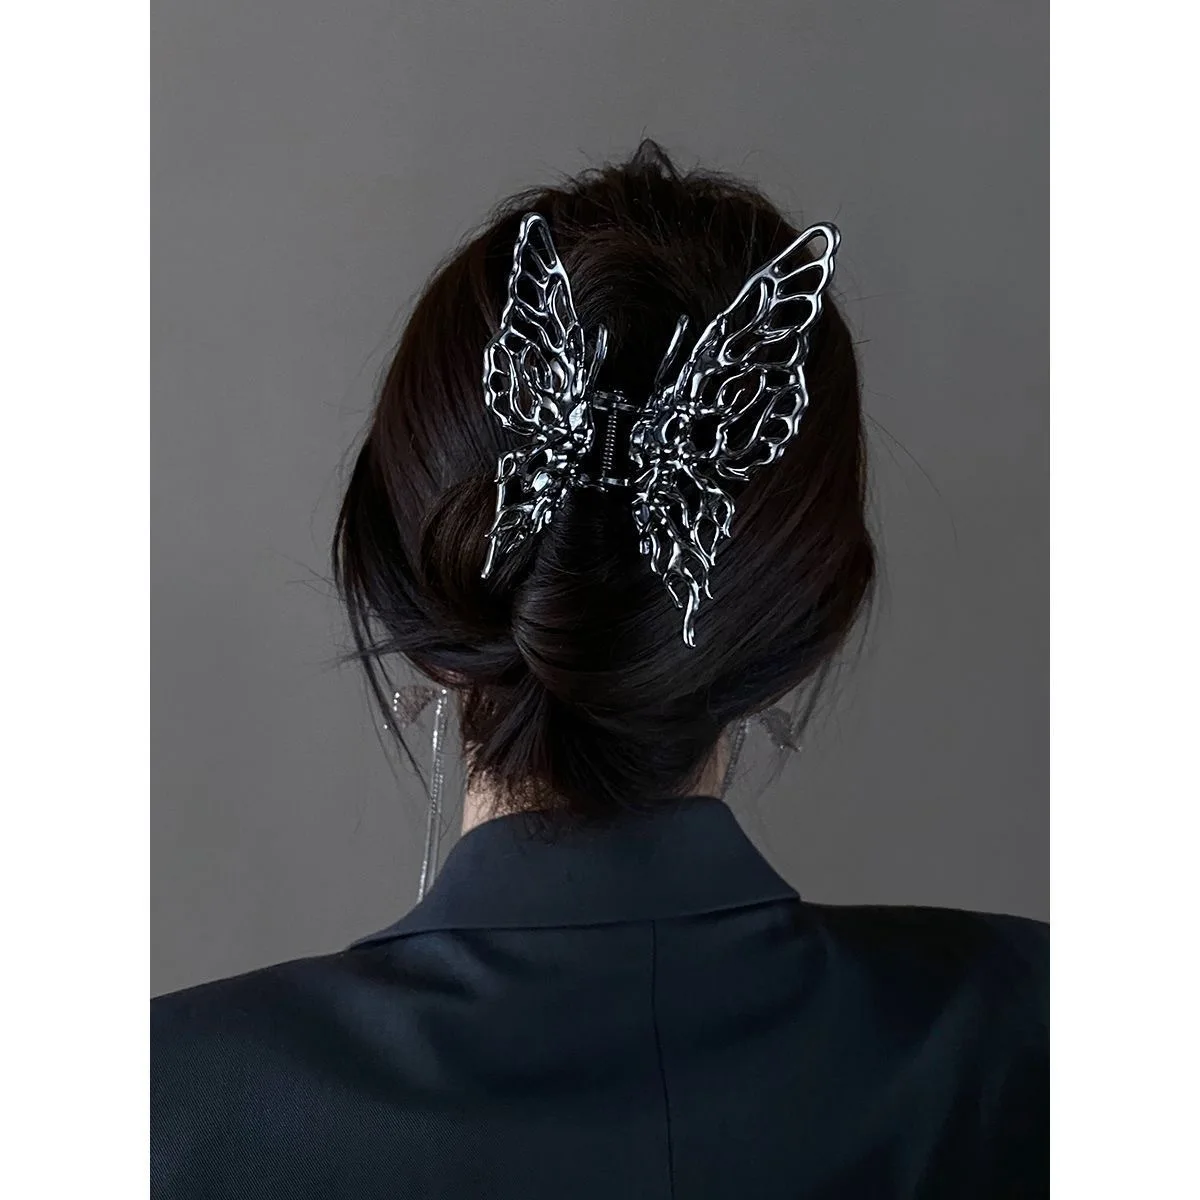 New Korea Bright Silver Cross Geometric Hairpin Butterfly Grab Clip Rose Flower Hair Claw Woman Girls Styling Barrette Headdress rose and owls 11ct stamped cross stitch 40 50cm